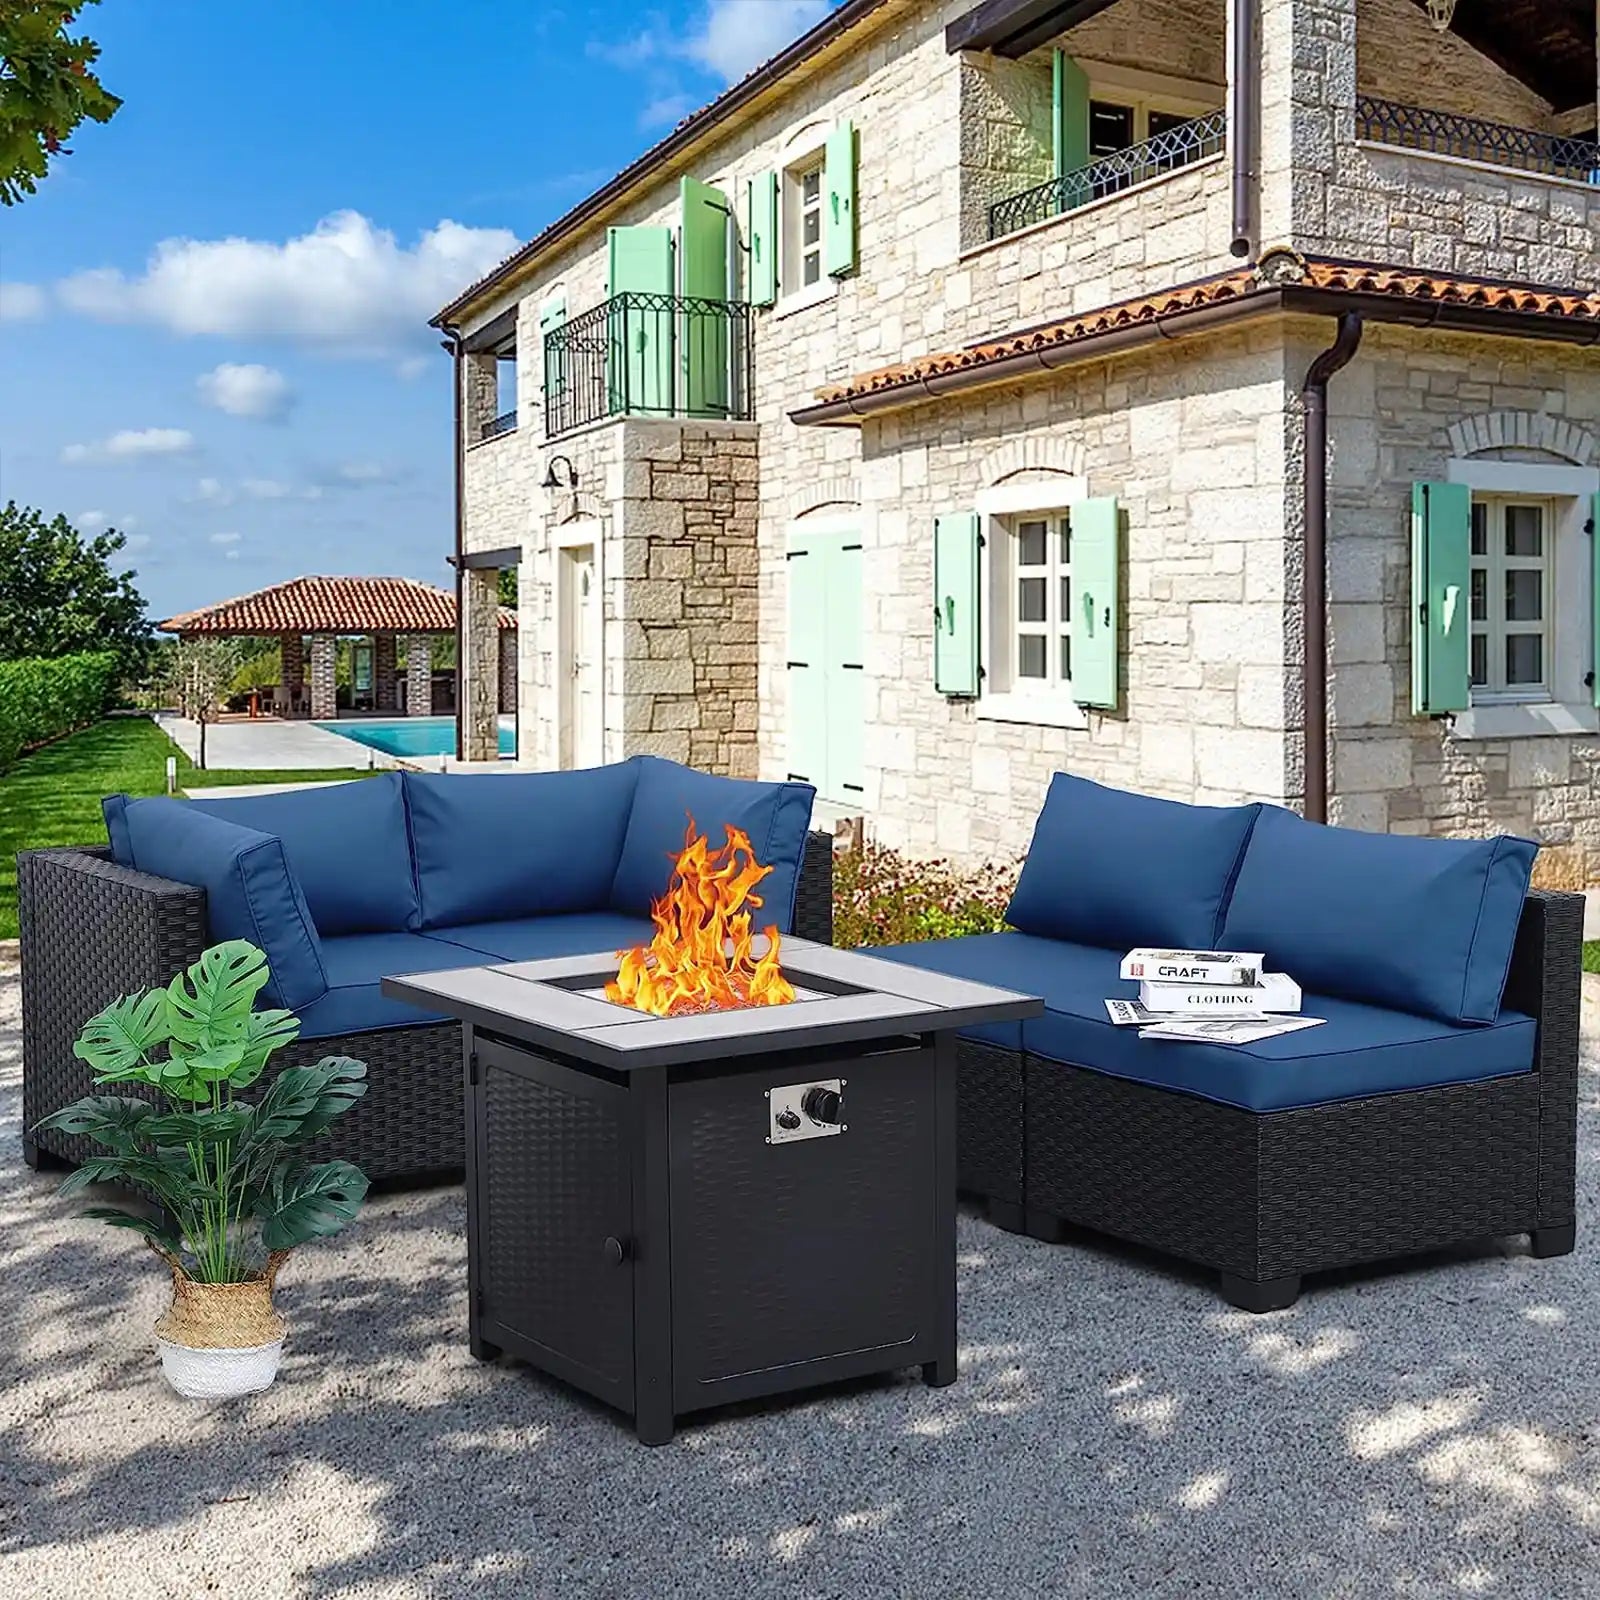 Outdoor Patio PE Wicker 5 Piece Furniture Set, Black Rattan Sectional Conversation Sofa Chair with Square Propane Fire Pit Table, Navy Blue Cushion